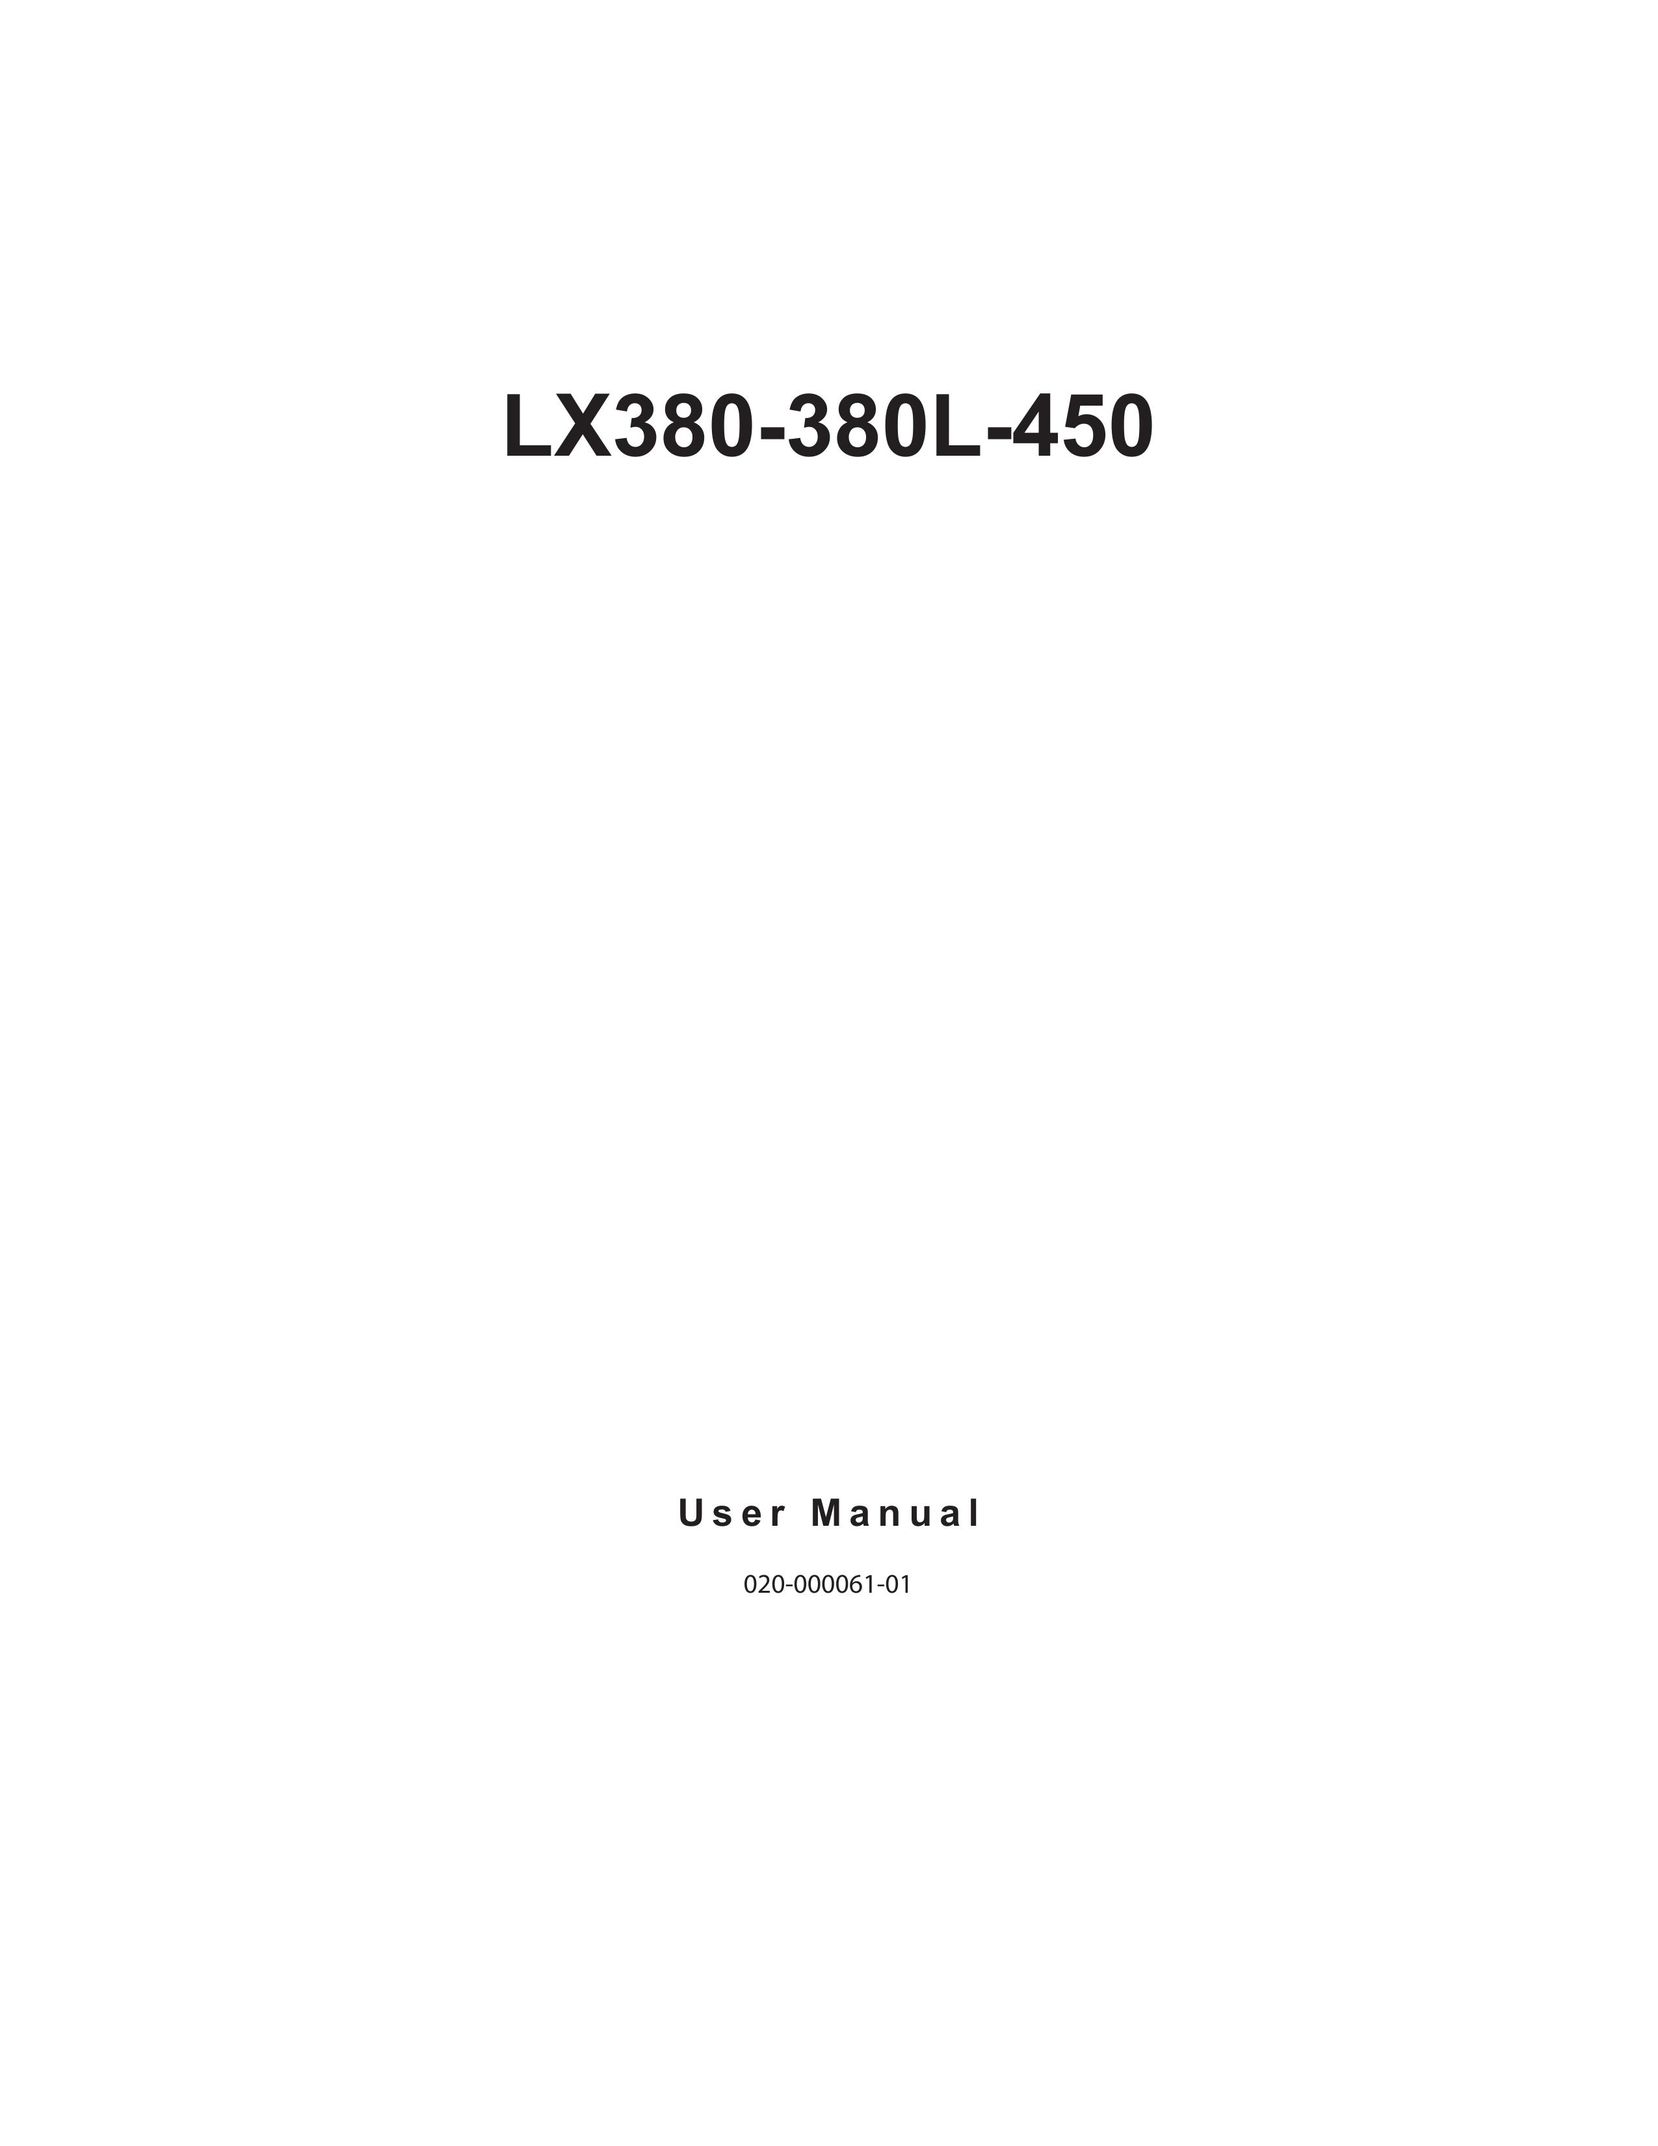 Christie Digital Systems 103-009100-01 Projector User Manual